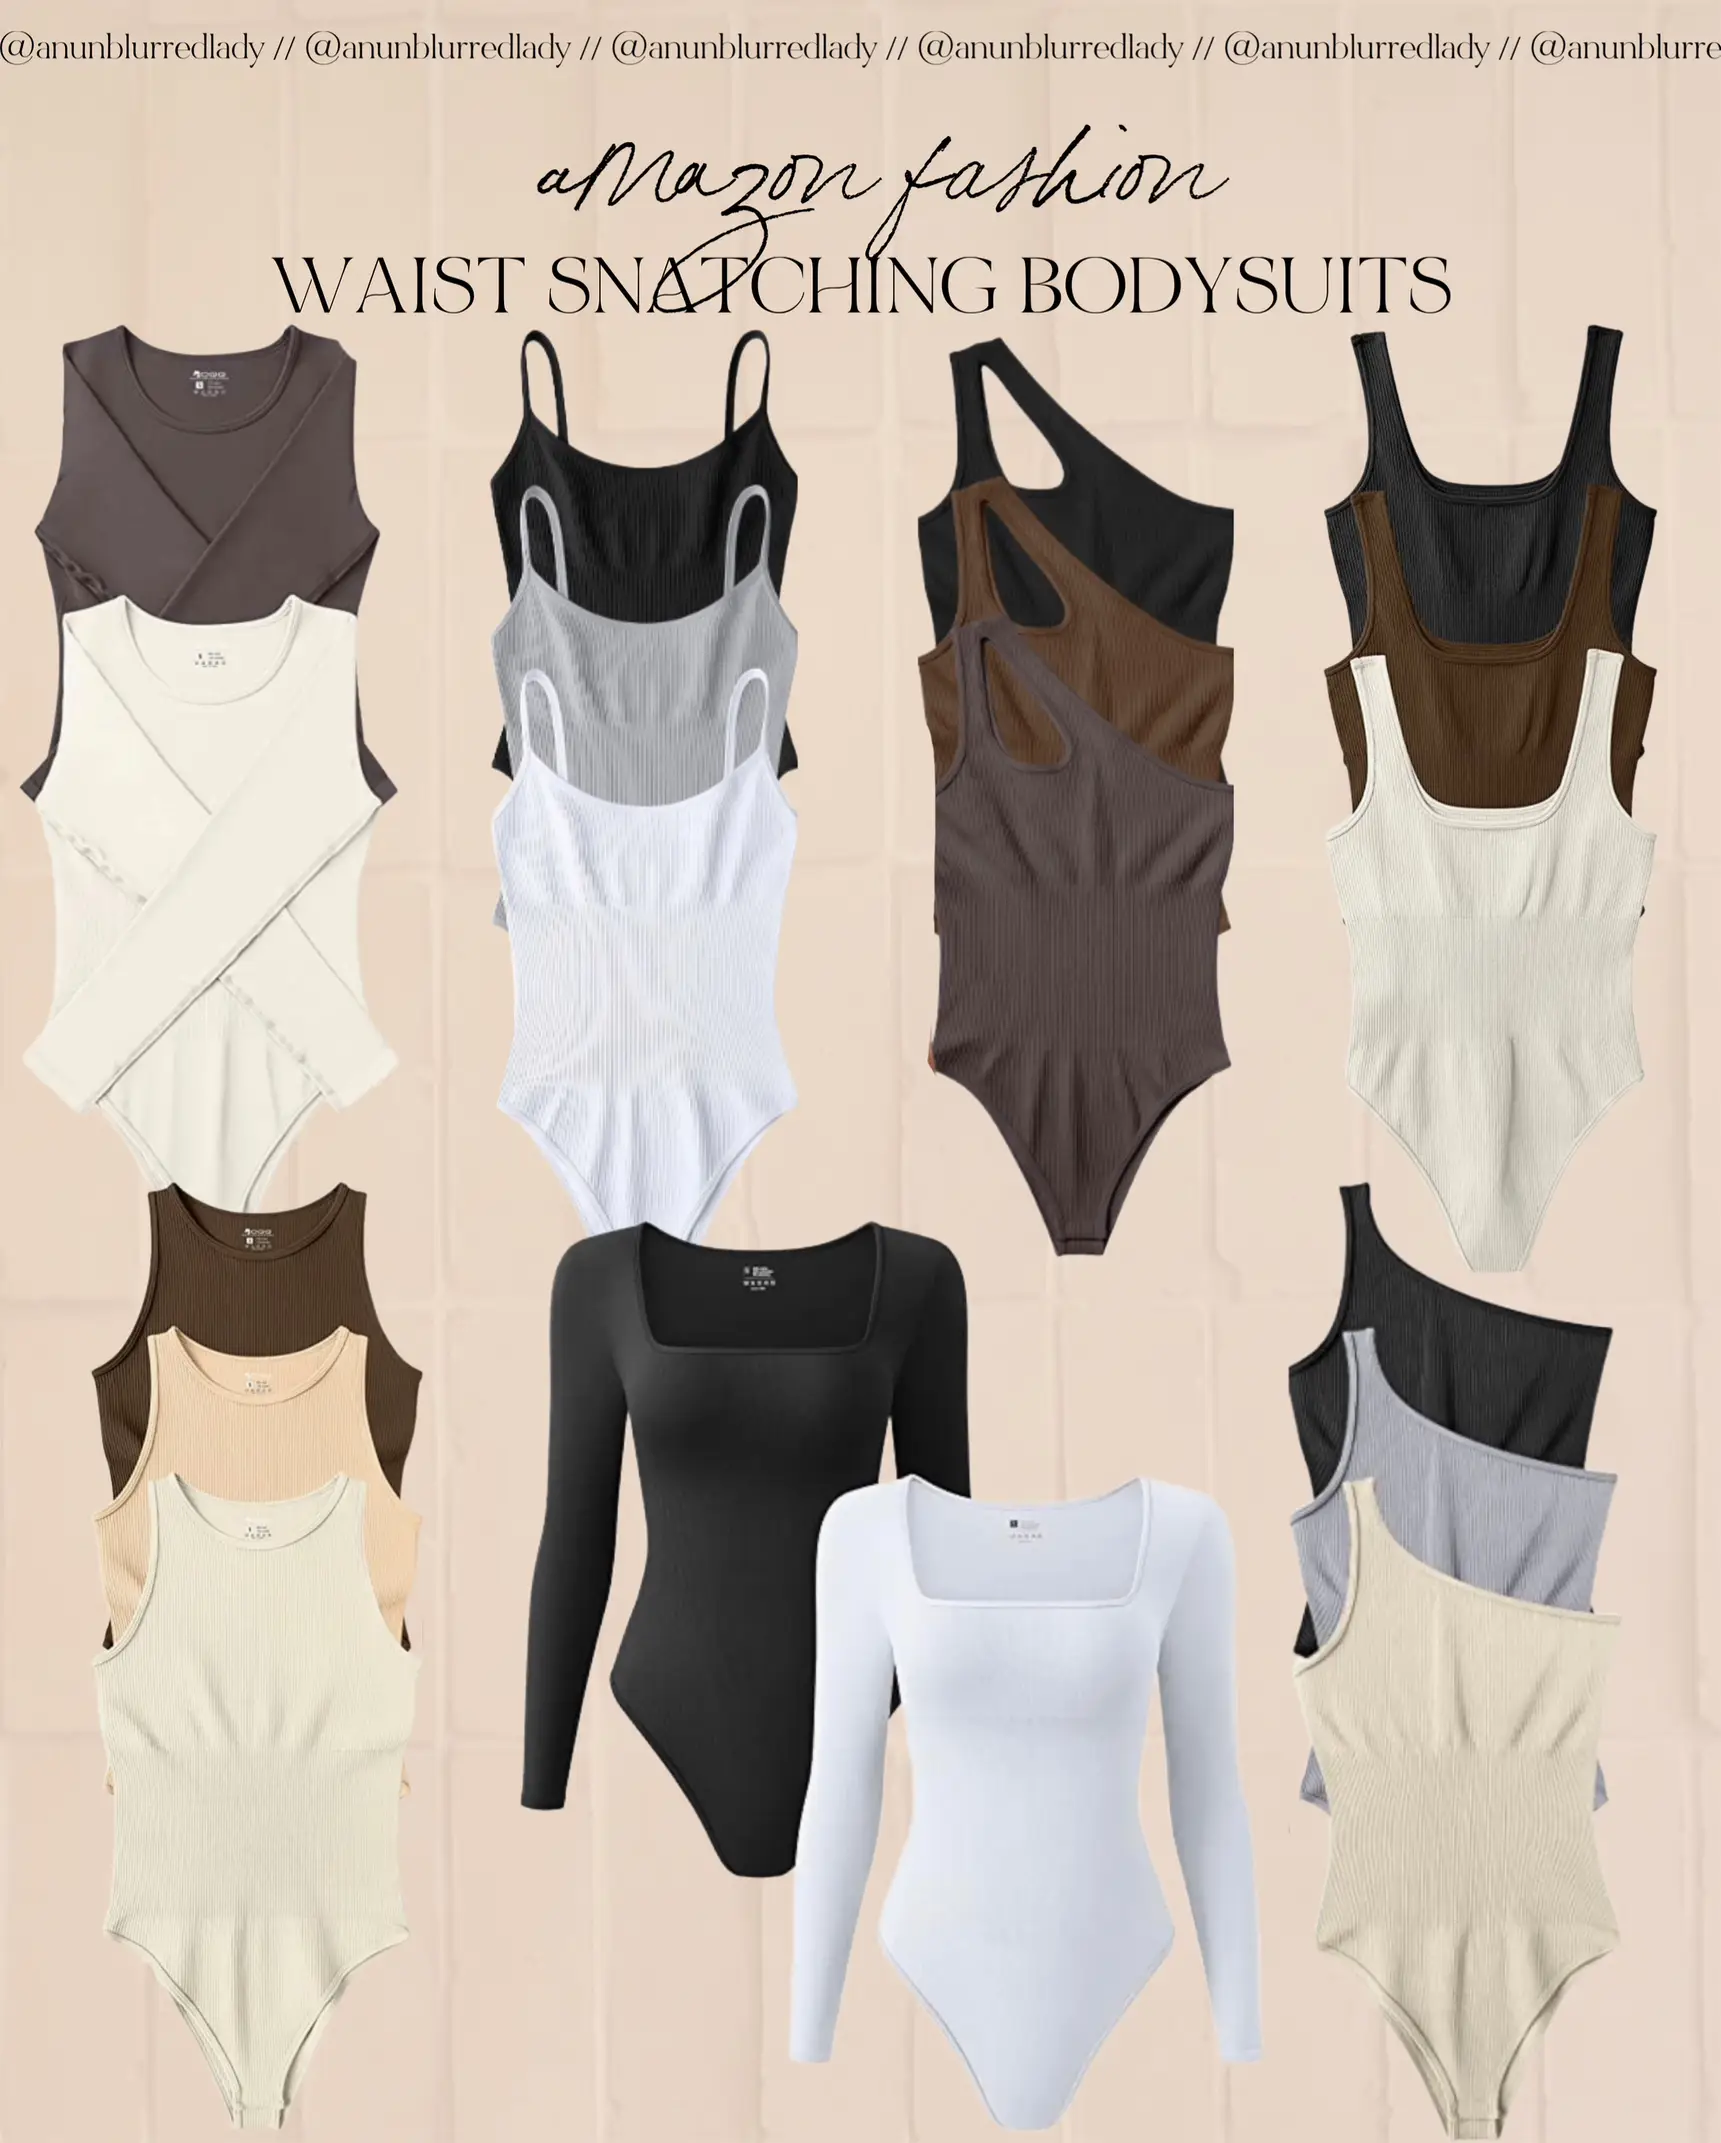 Waist snatching bodysuit!, Gallery posted by Nidhi Patel